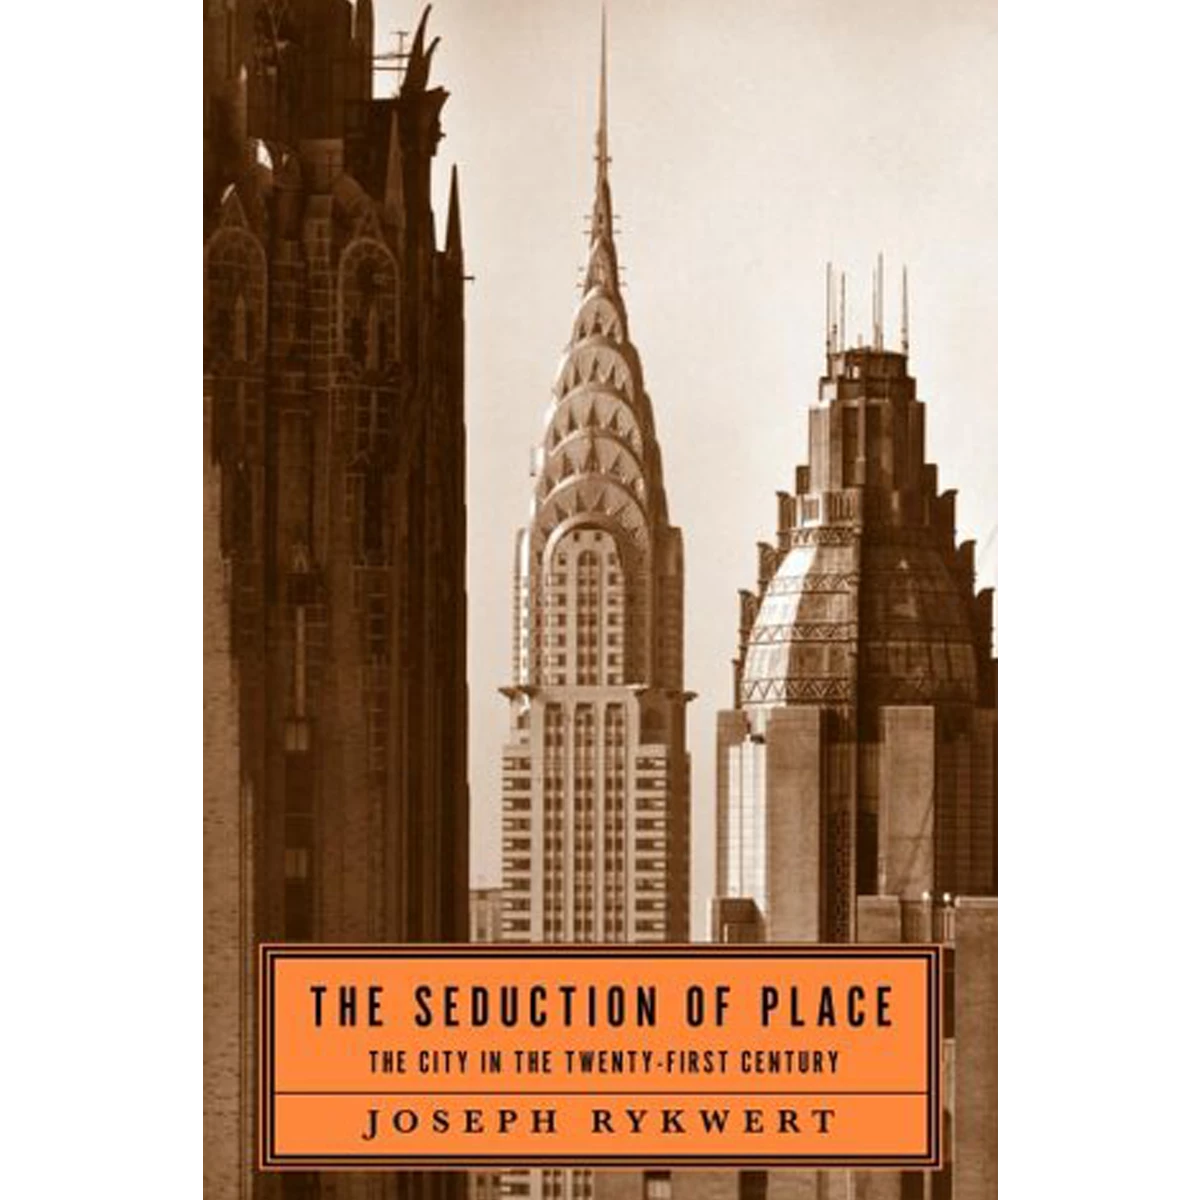 The Seduction of Place: The City in the 21st Century